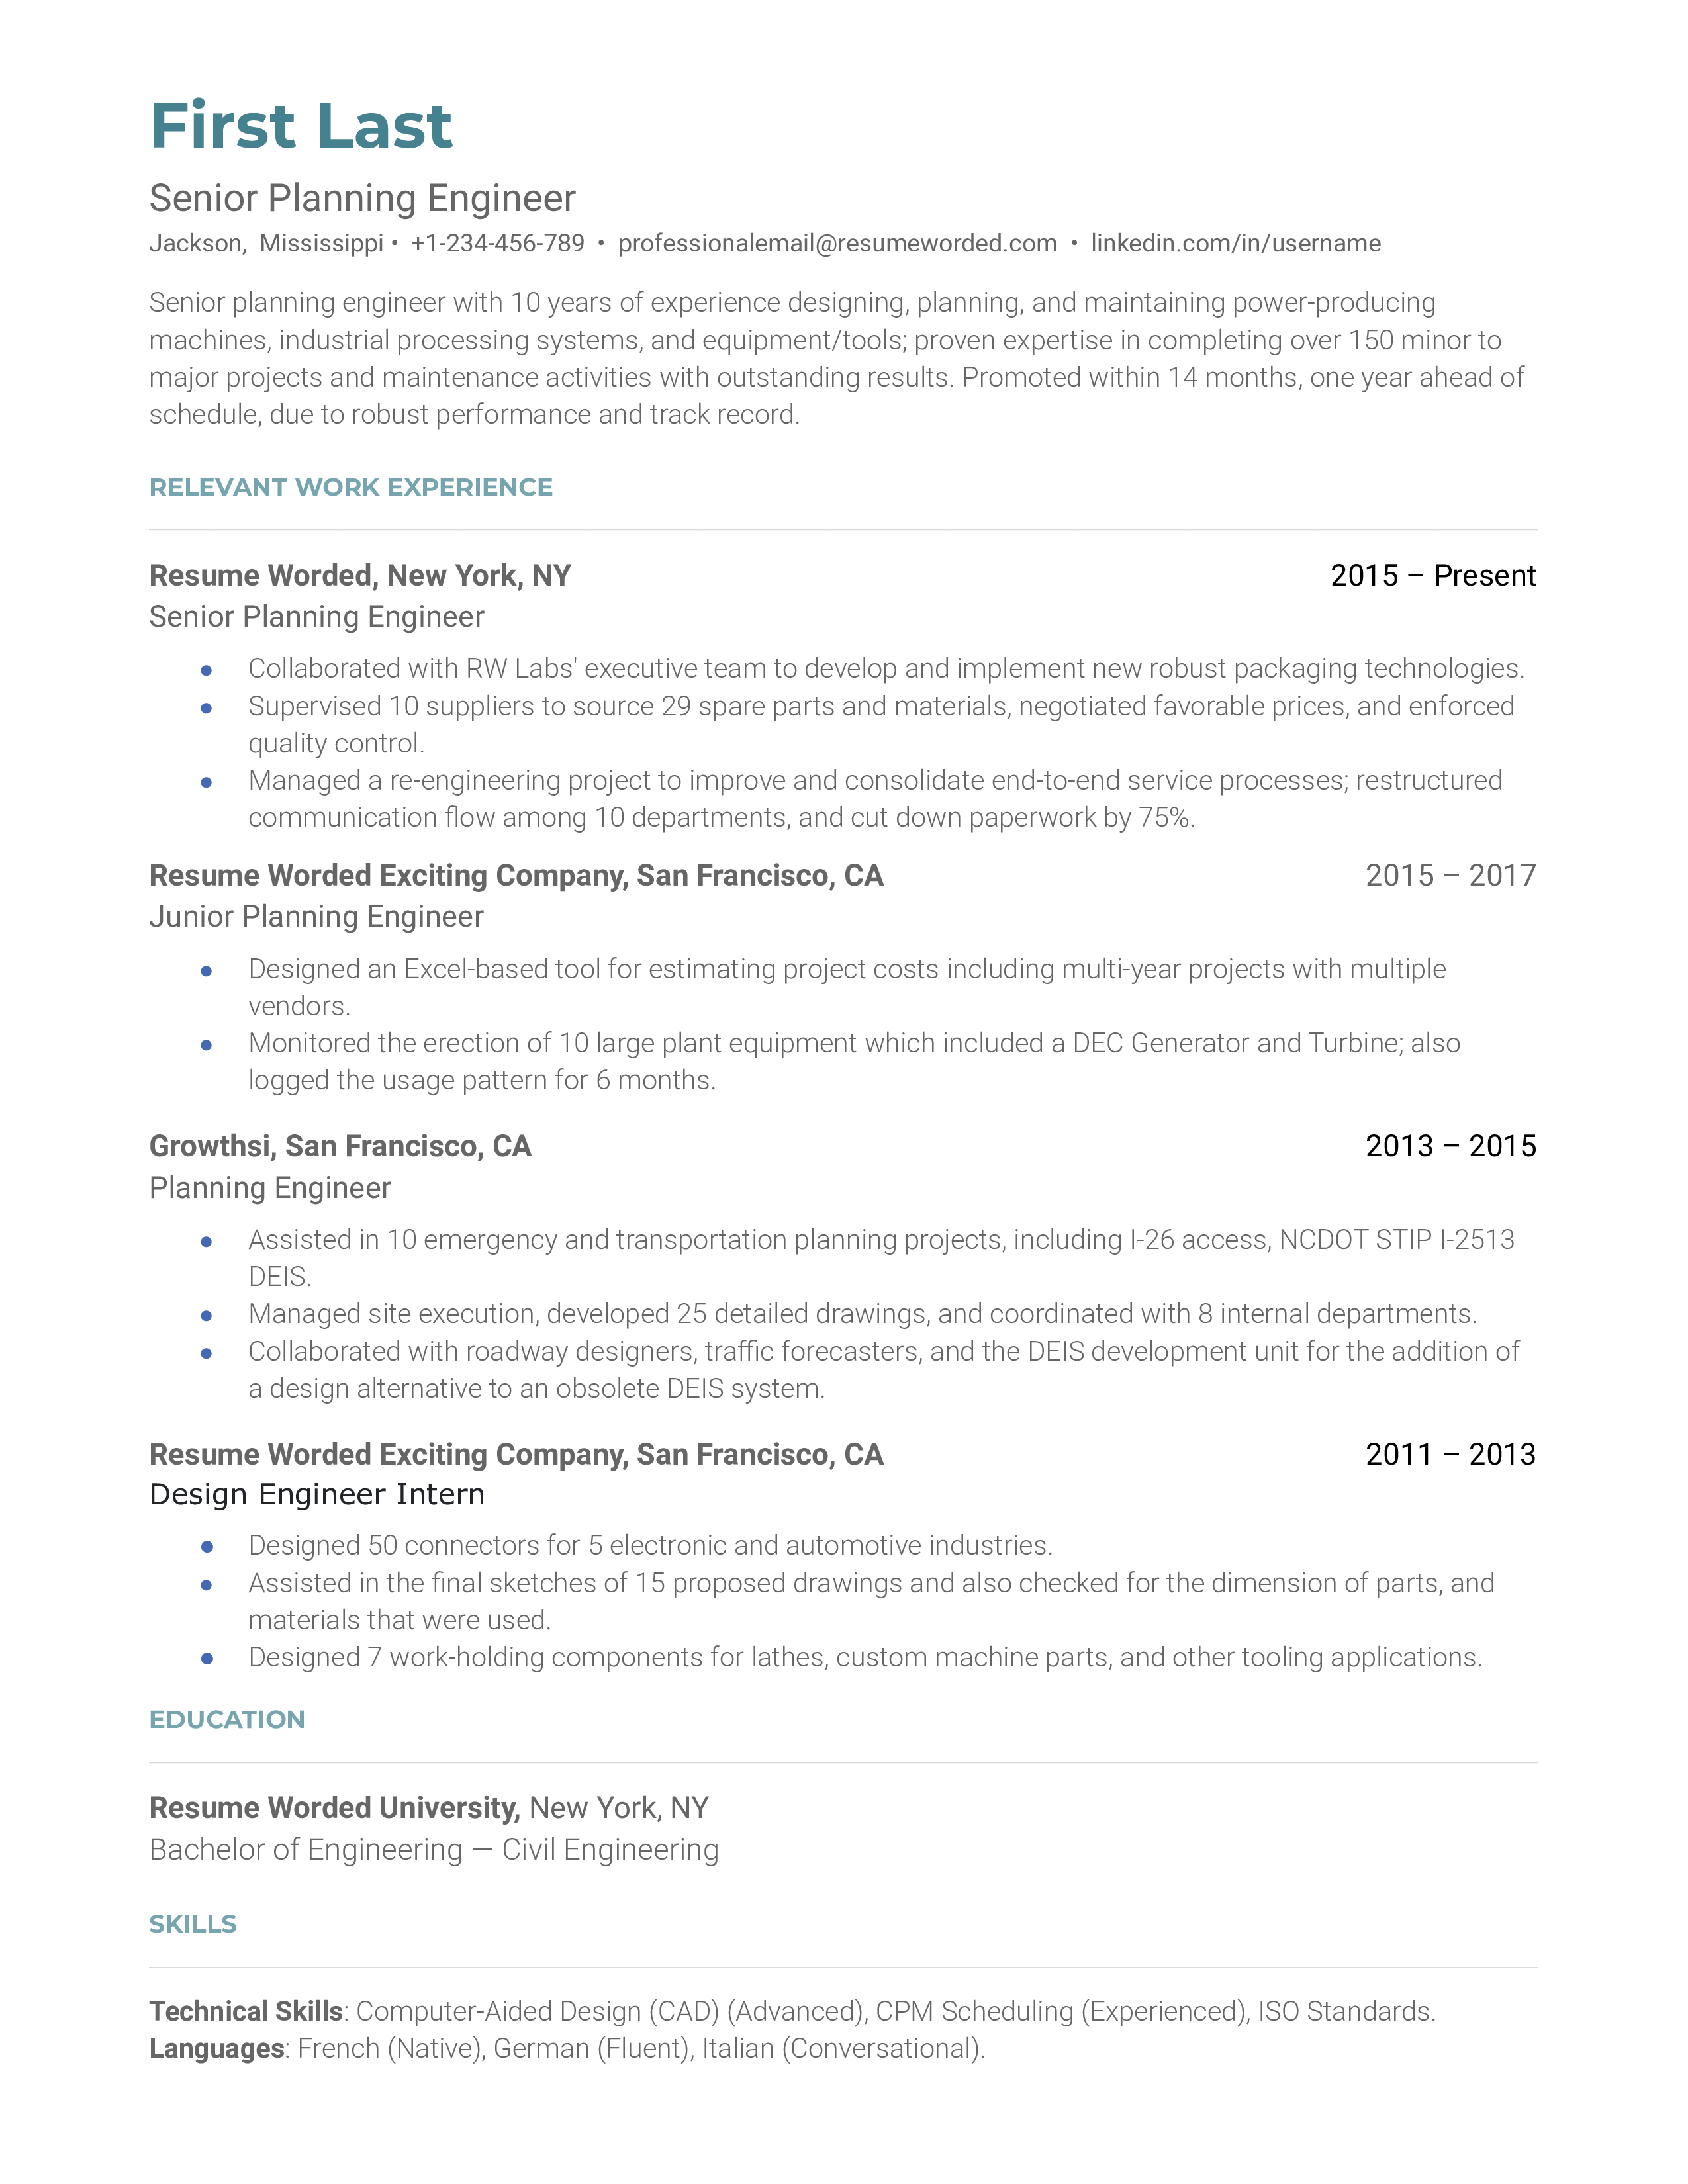 A senior planning engineer resume example that includes brief contact information, a professional description, and work history